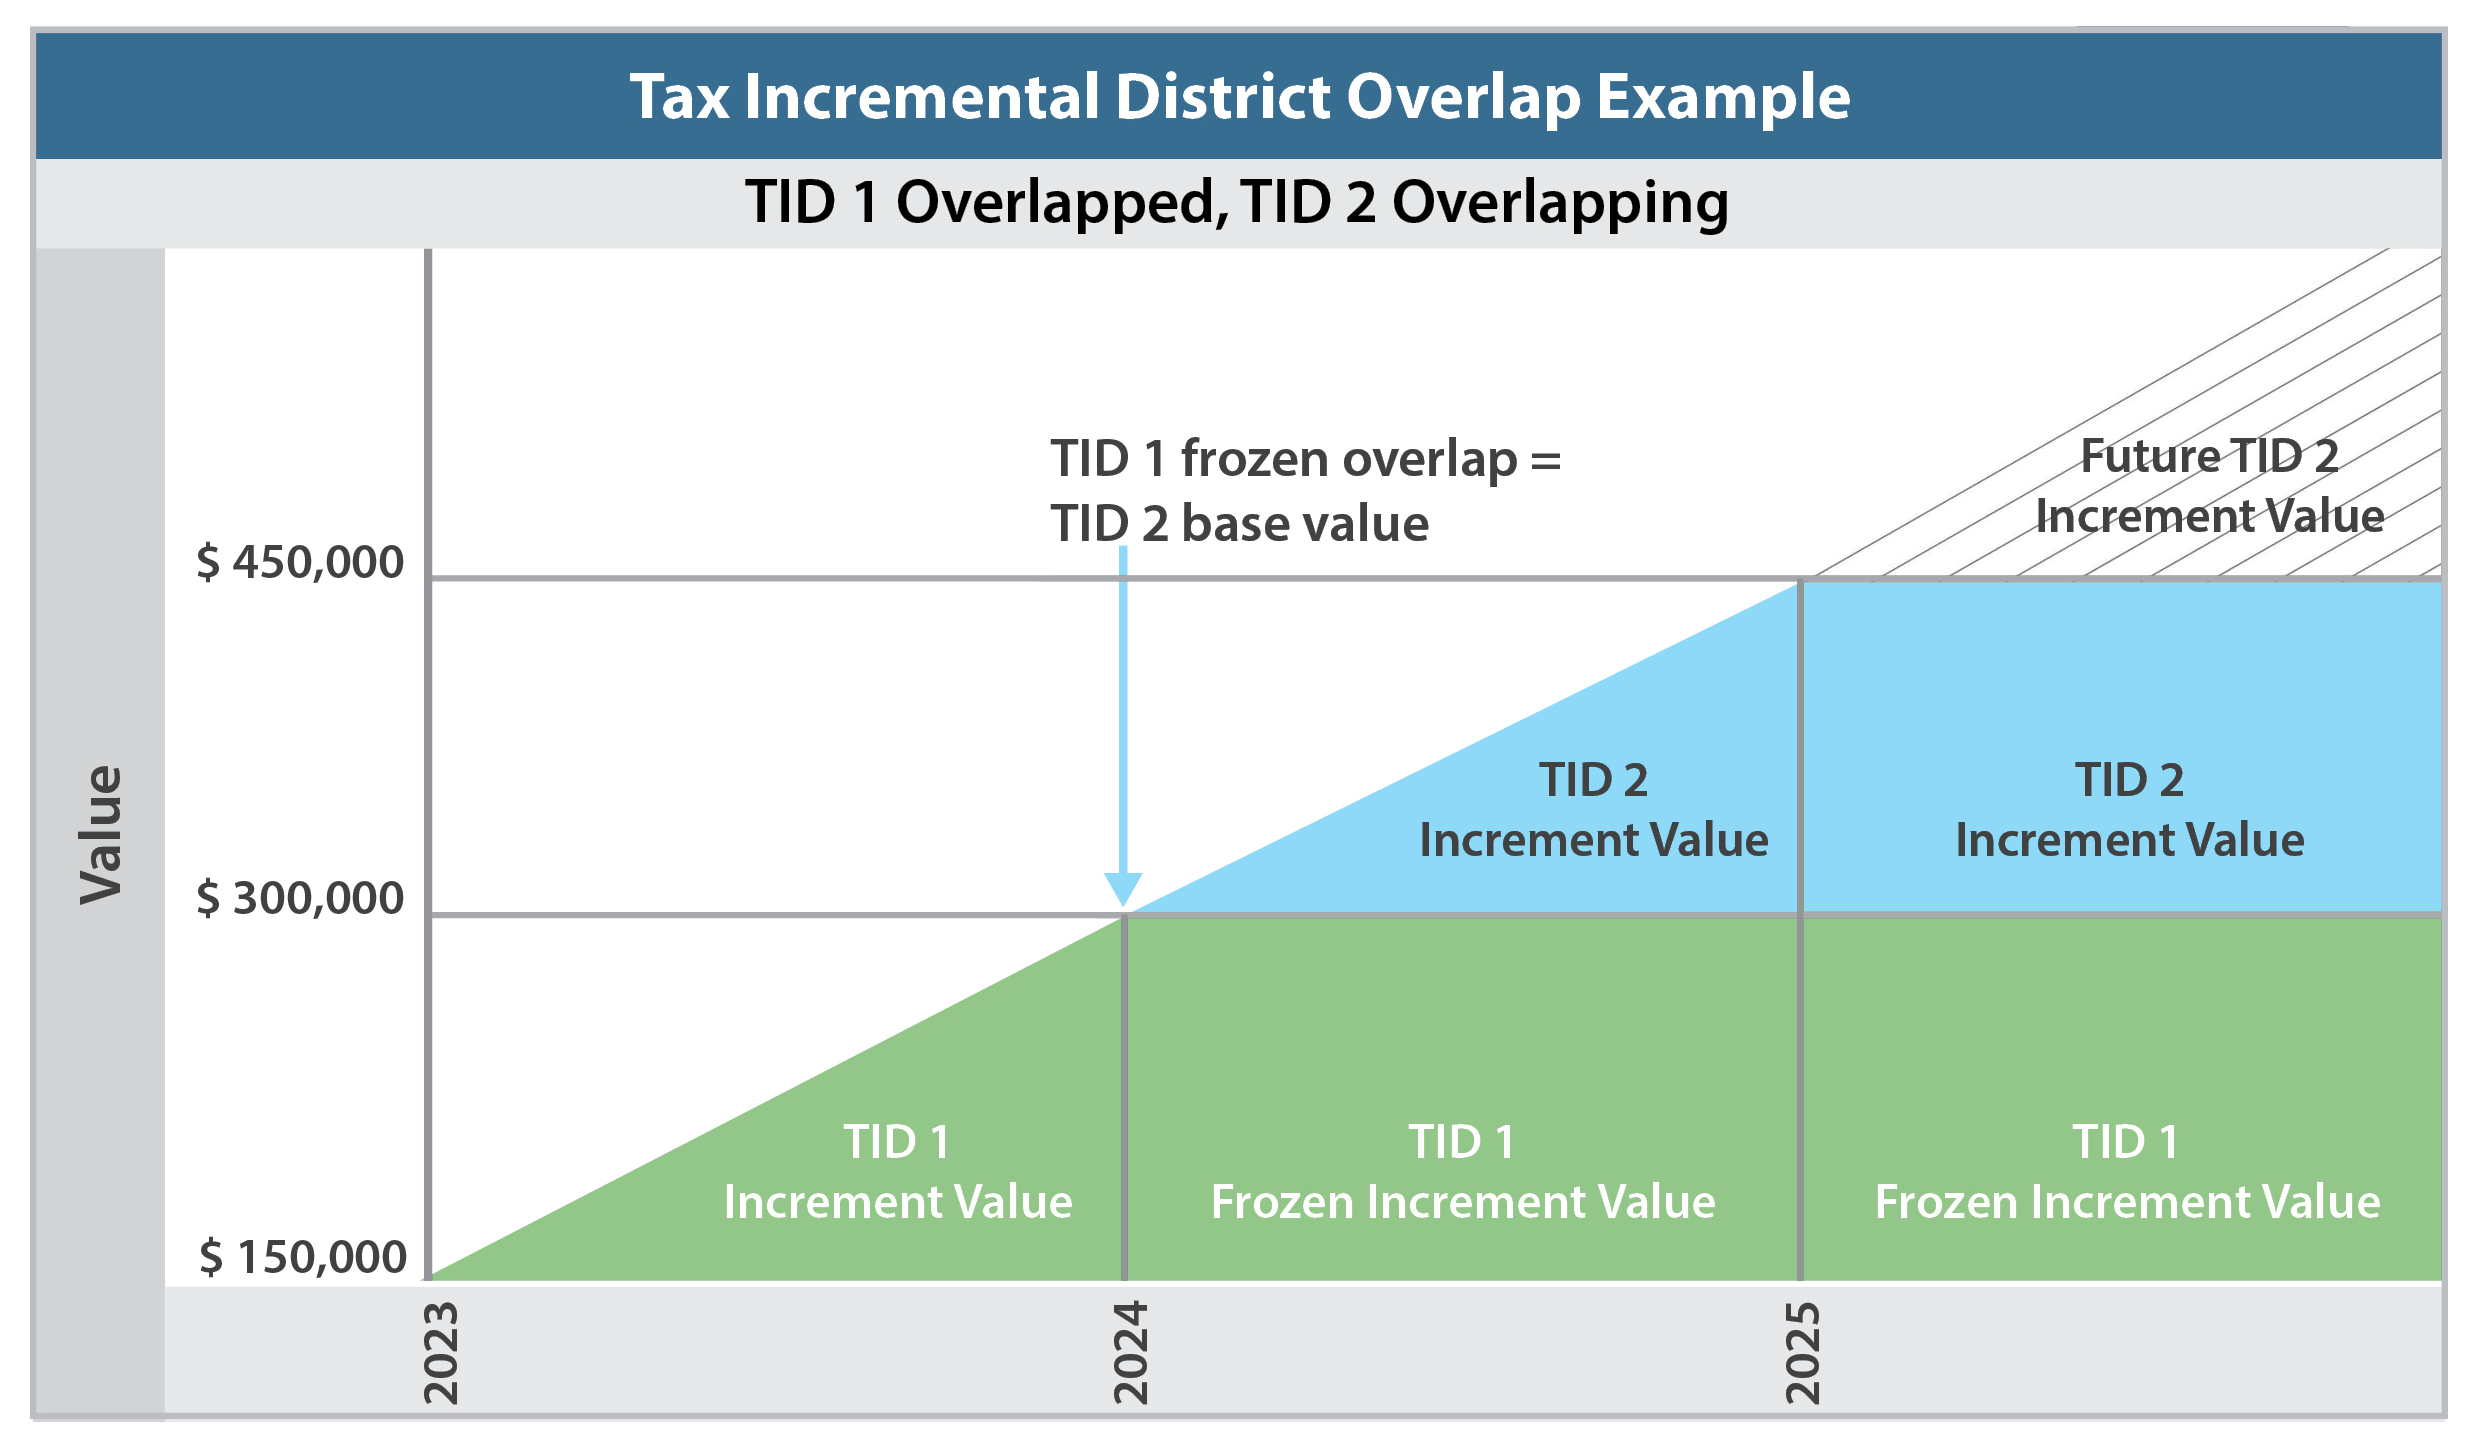 Tax Incremental District Overlap Example, the bulleted list following this image explains the overlap structure